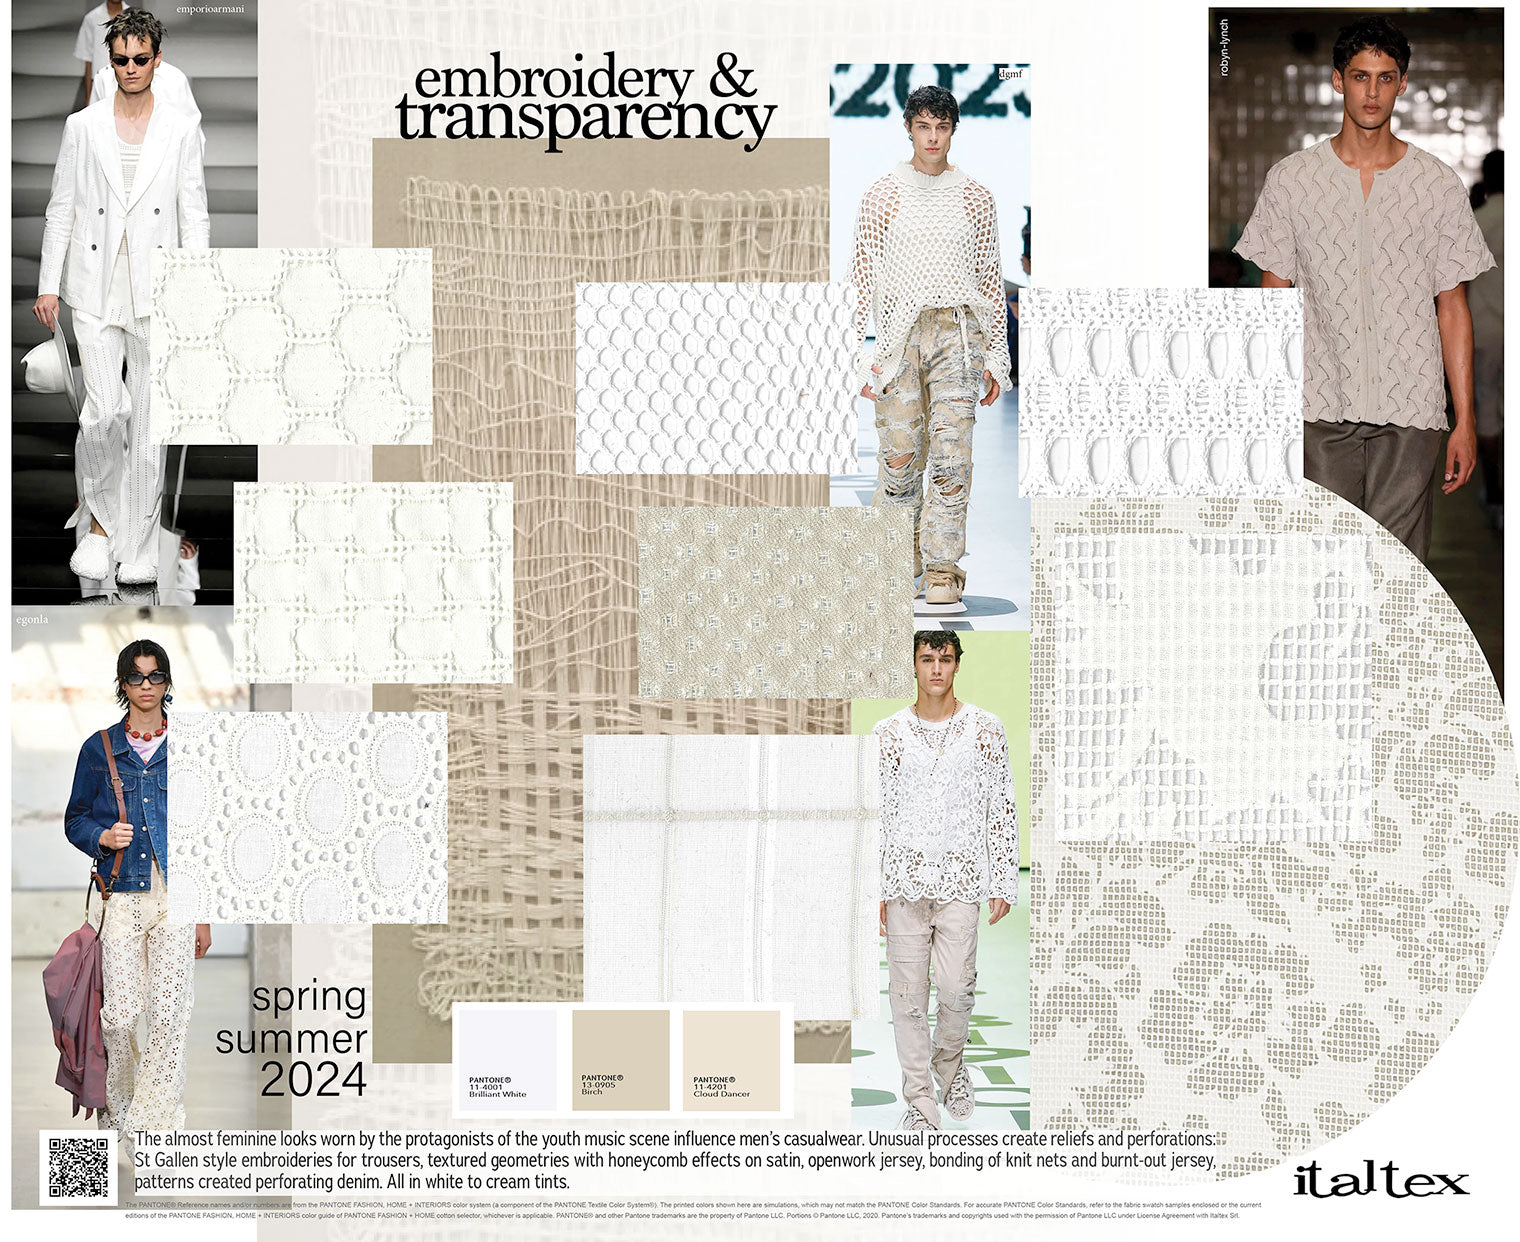 Menswear Colour and Fabric Trends Spring/Summer 2024 – Italtex Trends